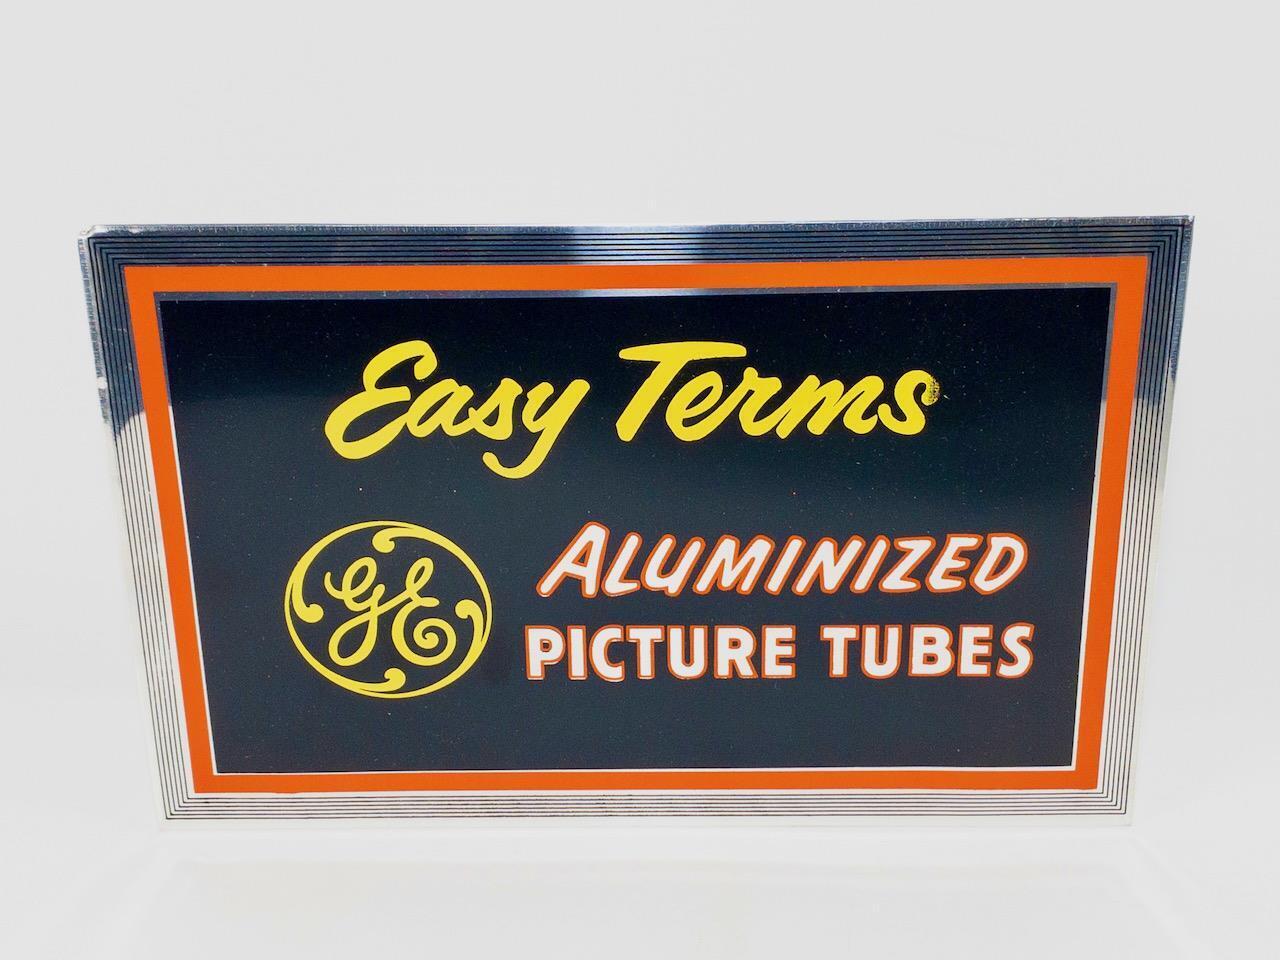 Vintage GE Aluminized Picture Tubes In Store Display Sign 11